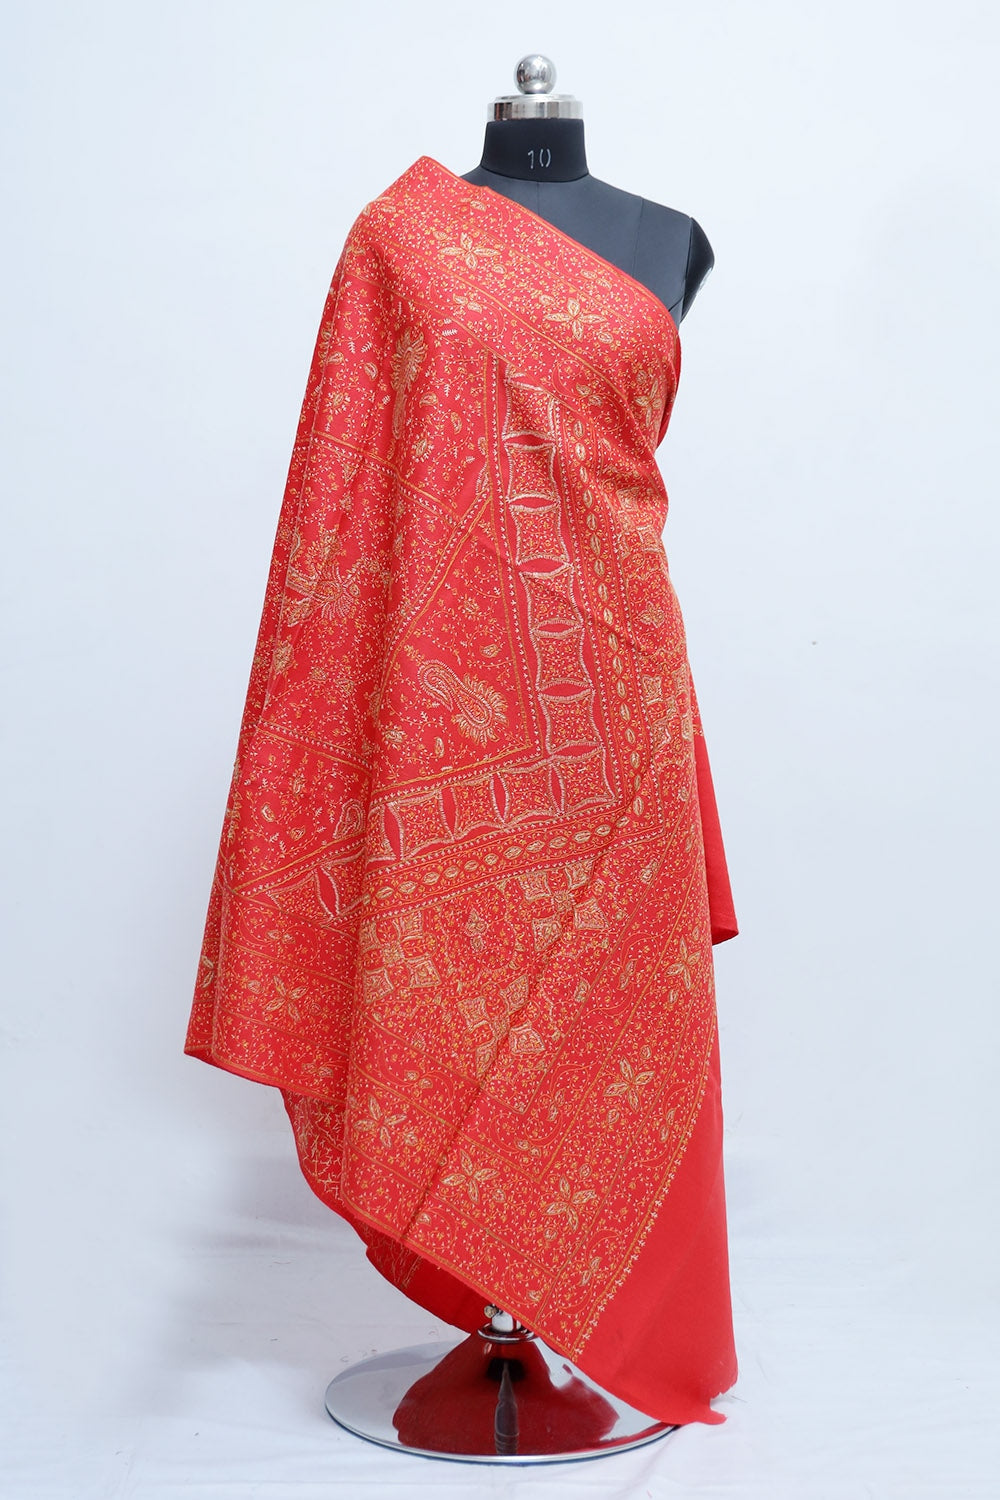 Red Colour Embroidered Sozni Shawl Enriched With Beautiful